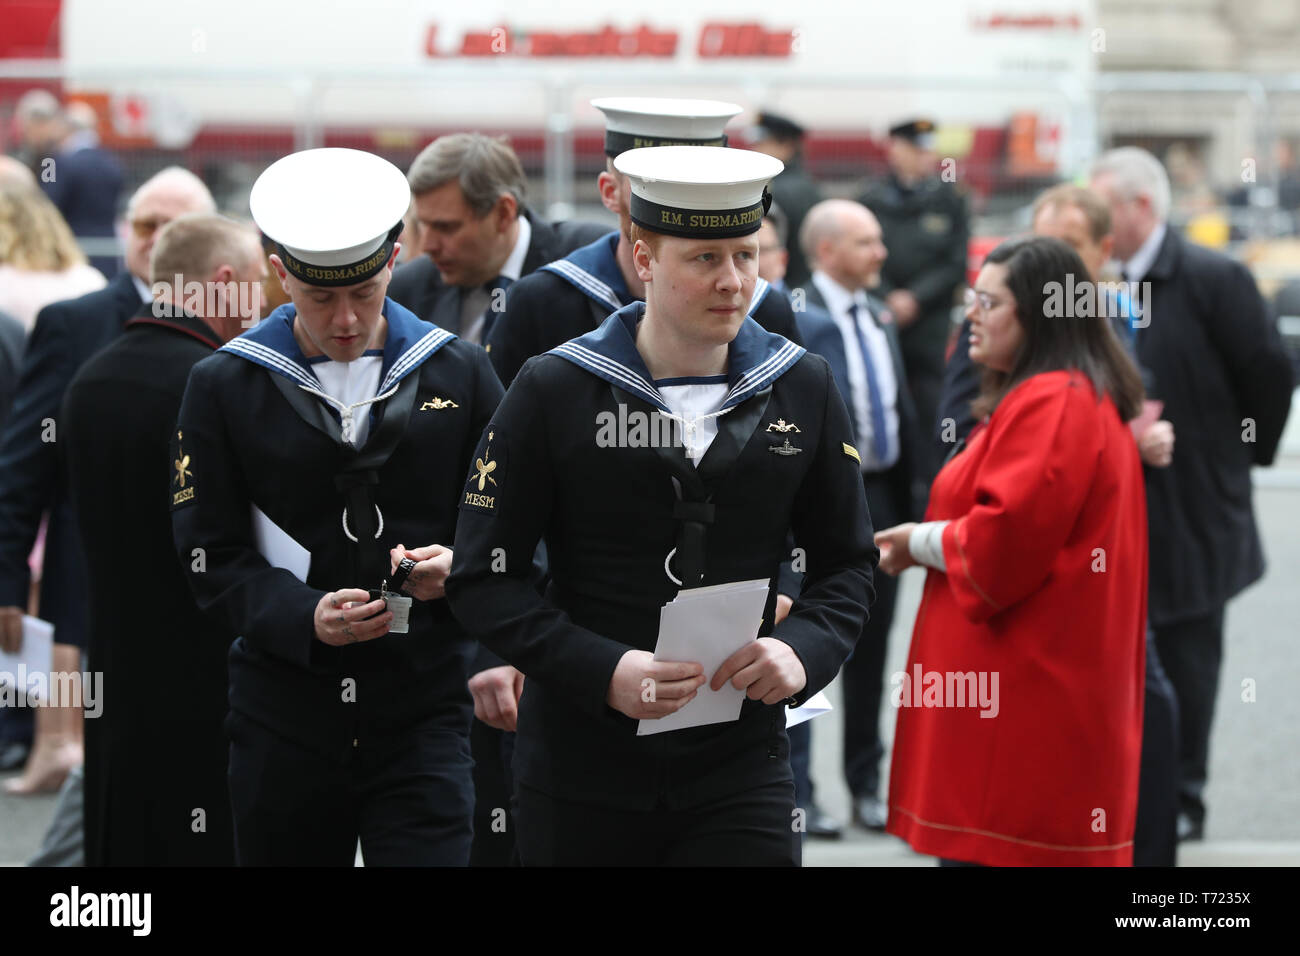 Submariners arrive to attend a service at Westminster Abbey, which The Duke of Cambridge will also attend to recognise fifty years of continuous deterrent at sea in his capacity as Commodore-in-Chief of the Submarine Service. Stock Photo